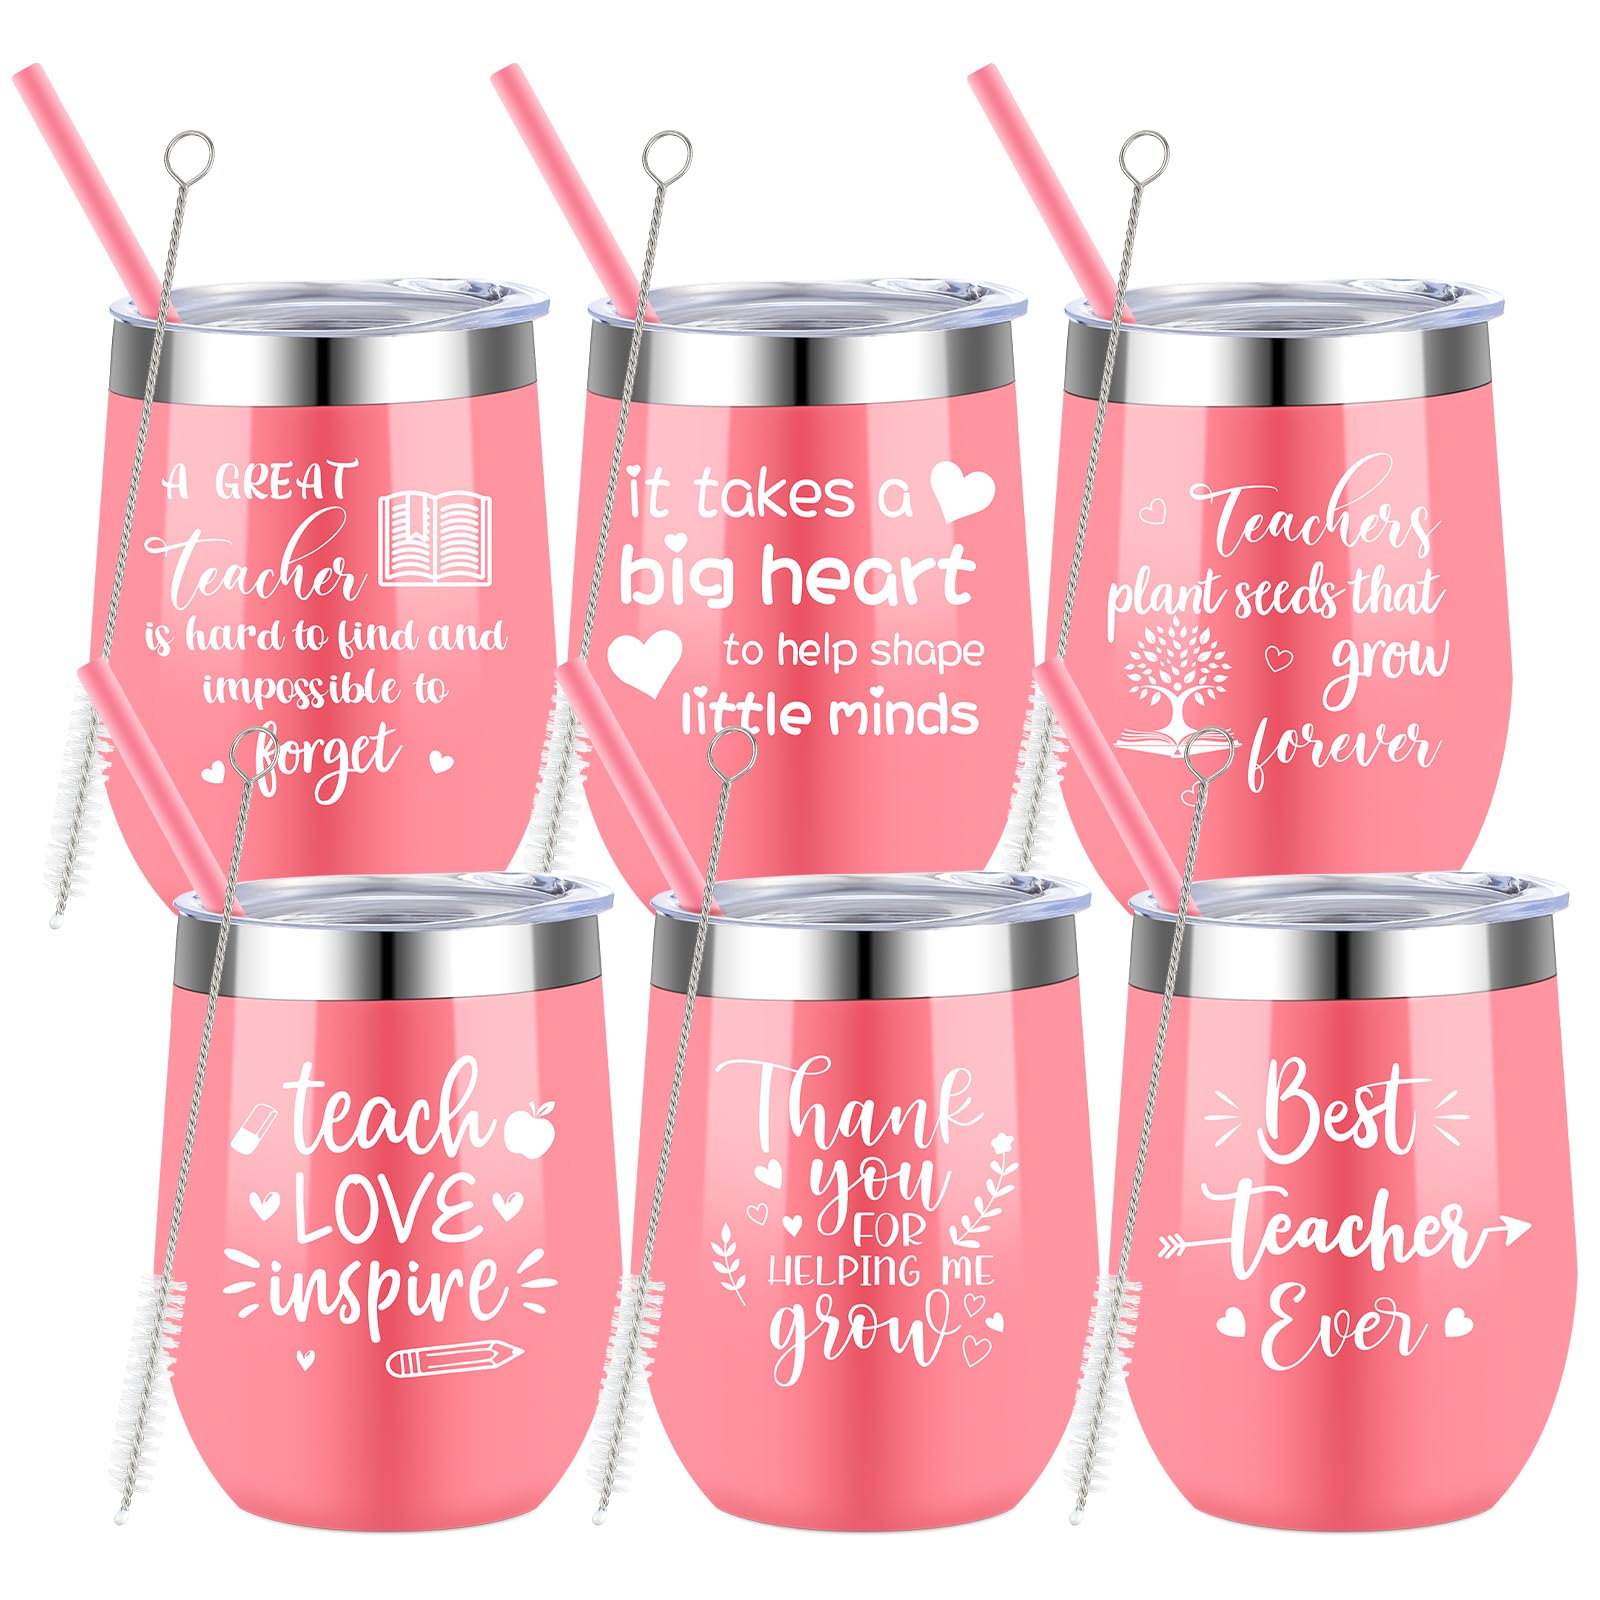 6 Pcs Christmas Teacher Appreciation Gifts Thank You Teacher Gifts for Women Stainless Steel Teacher Tumbler with Straw and Lid 12 oz Insulated Teacher Mug Birthday Gifts for Teacher(Pink)